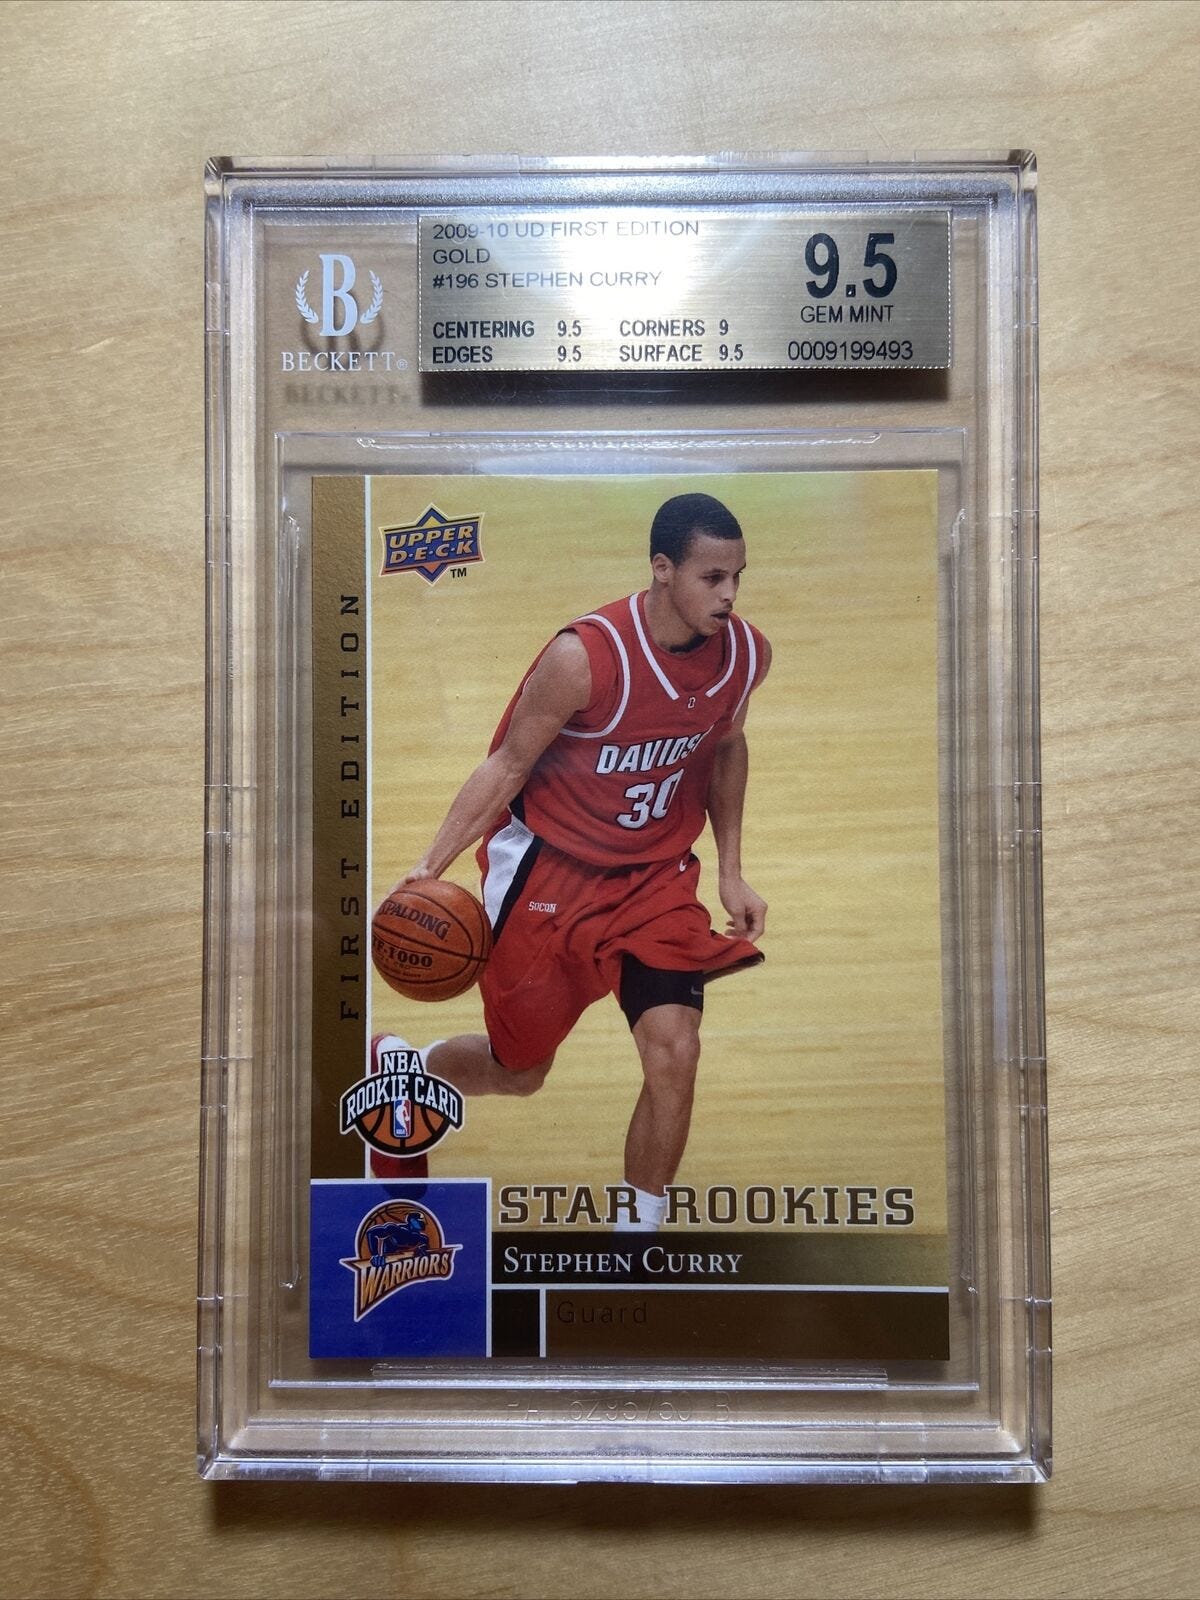 Image 1 - 2009-10-UD-First-1st-Edition-Gold-196-Stephen-Curry-RC-Rookie-BGS-9-5-HOF-SSP